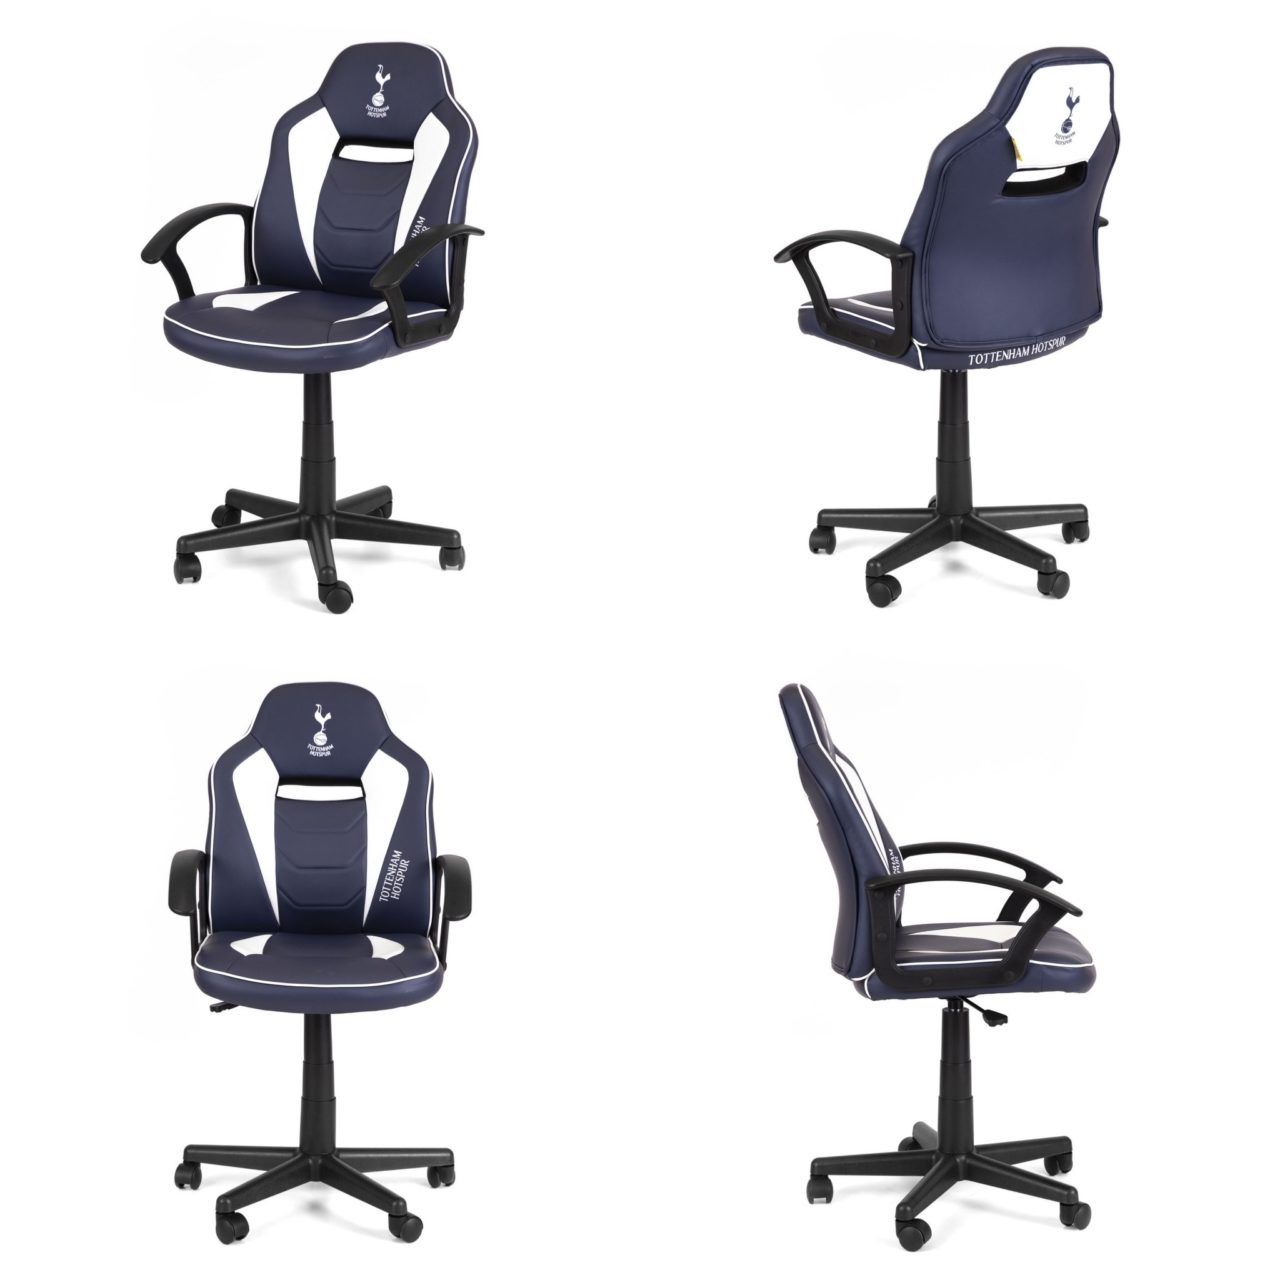 Spurs Defender Gaming Chair - A Fan Favourite!